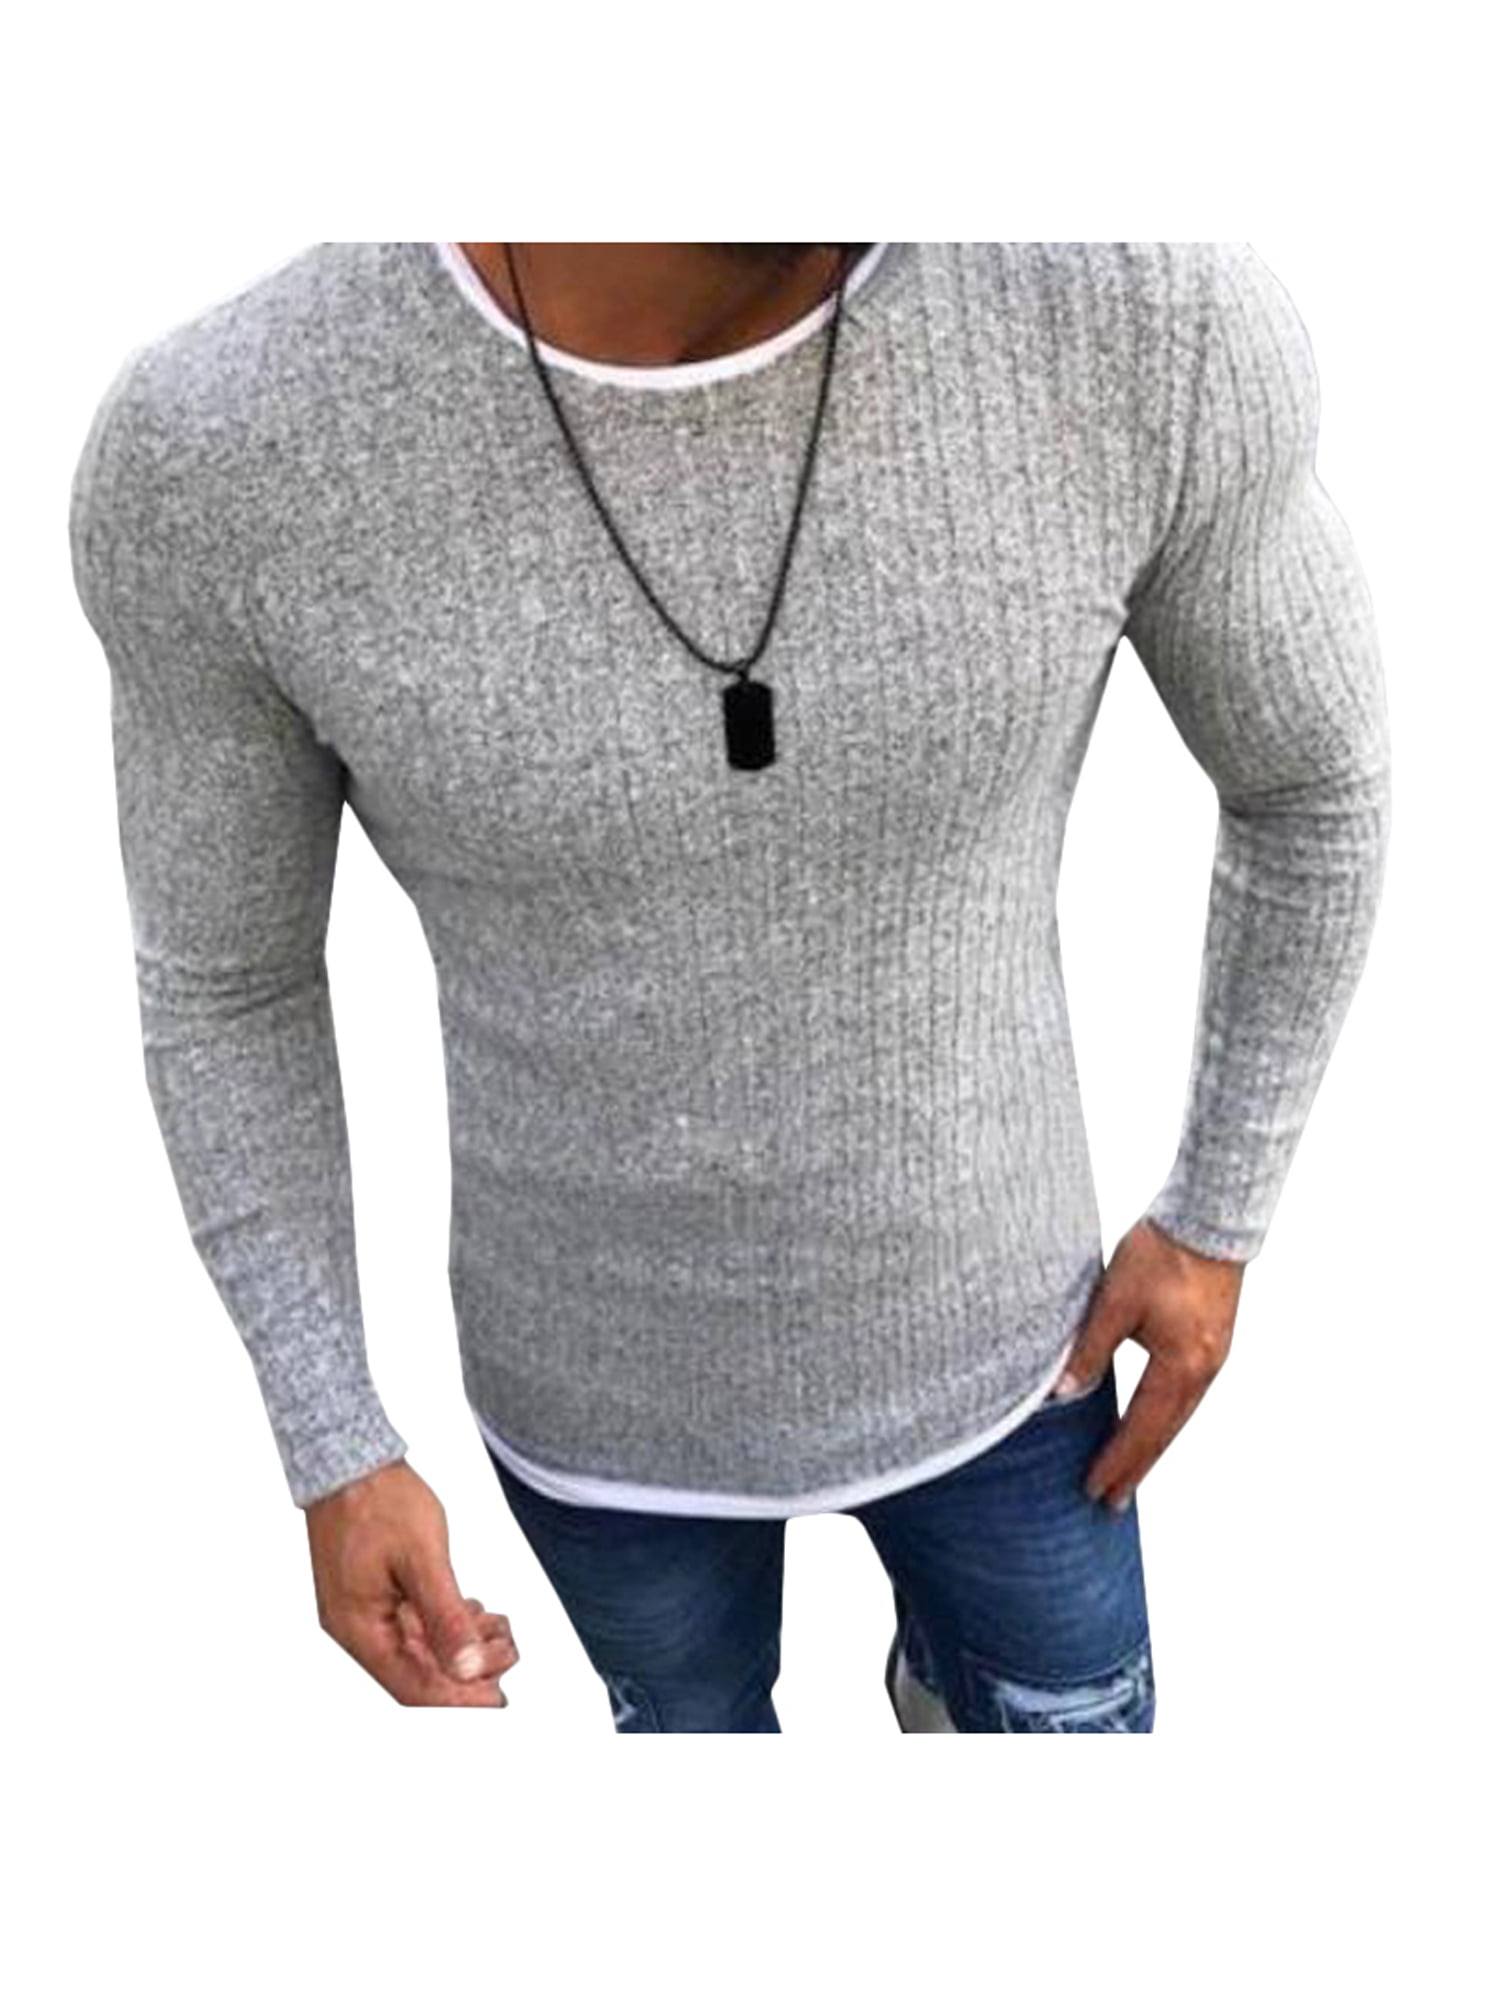 BEST Price Guaranteed Prices Drop As You Shop Slim Fit Knitted Pullover ...